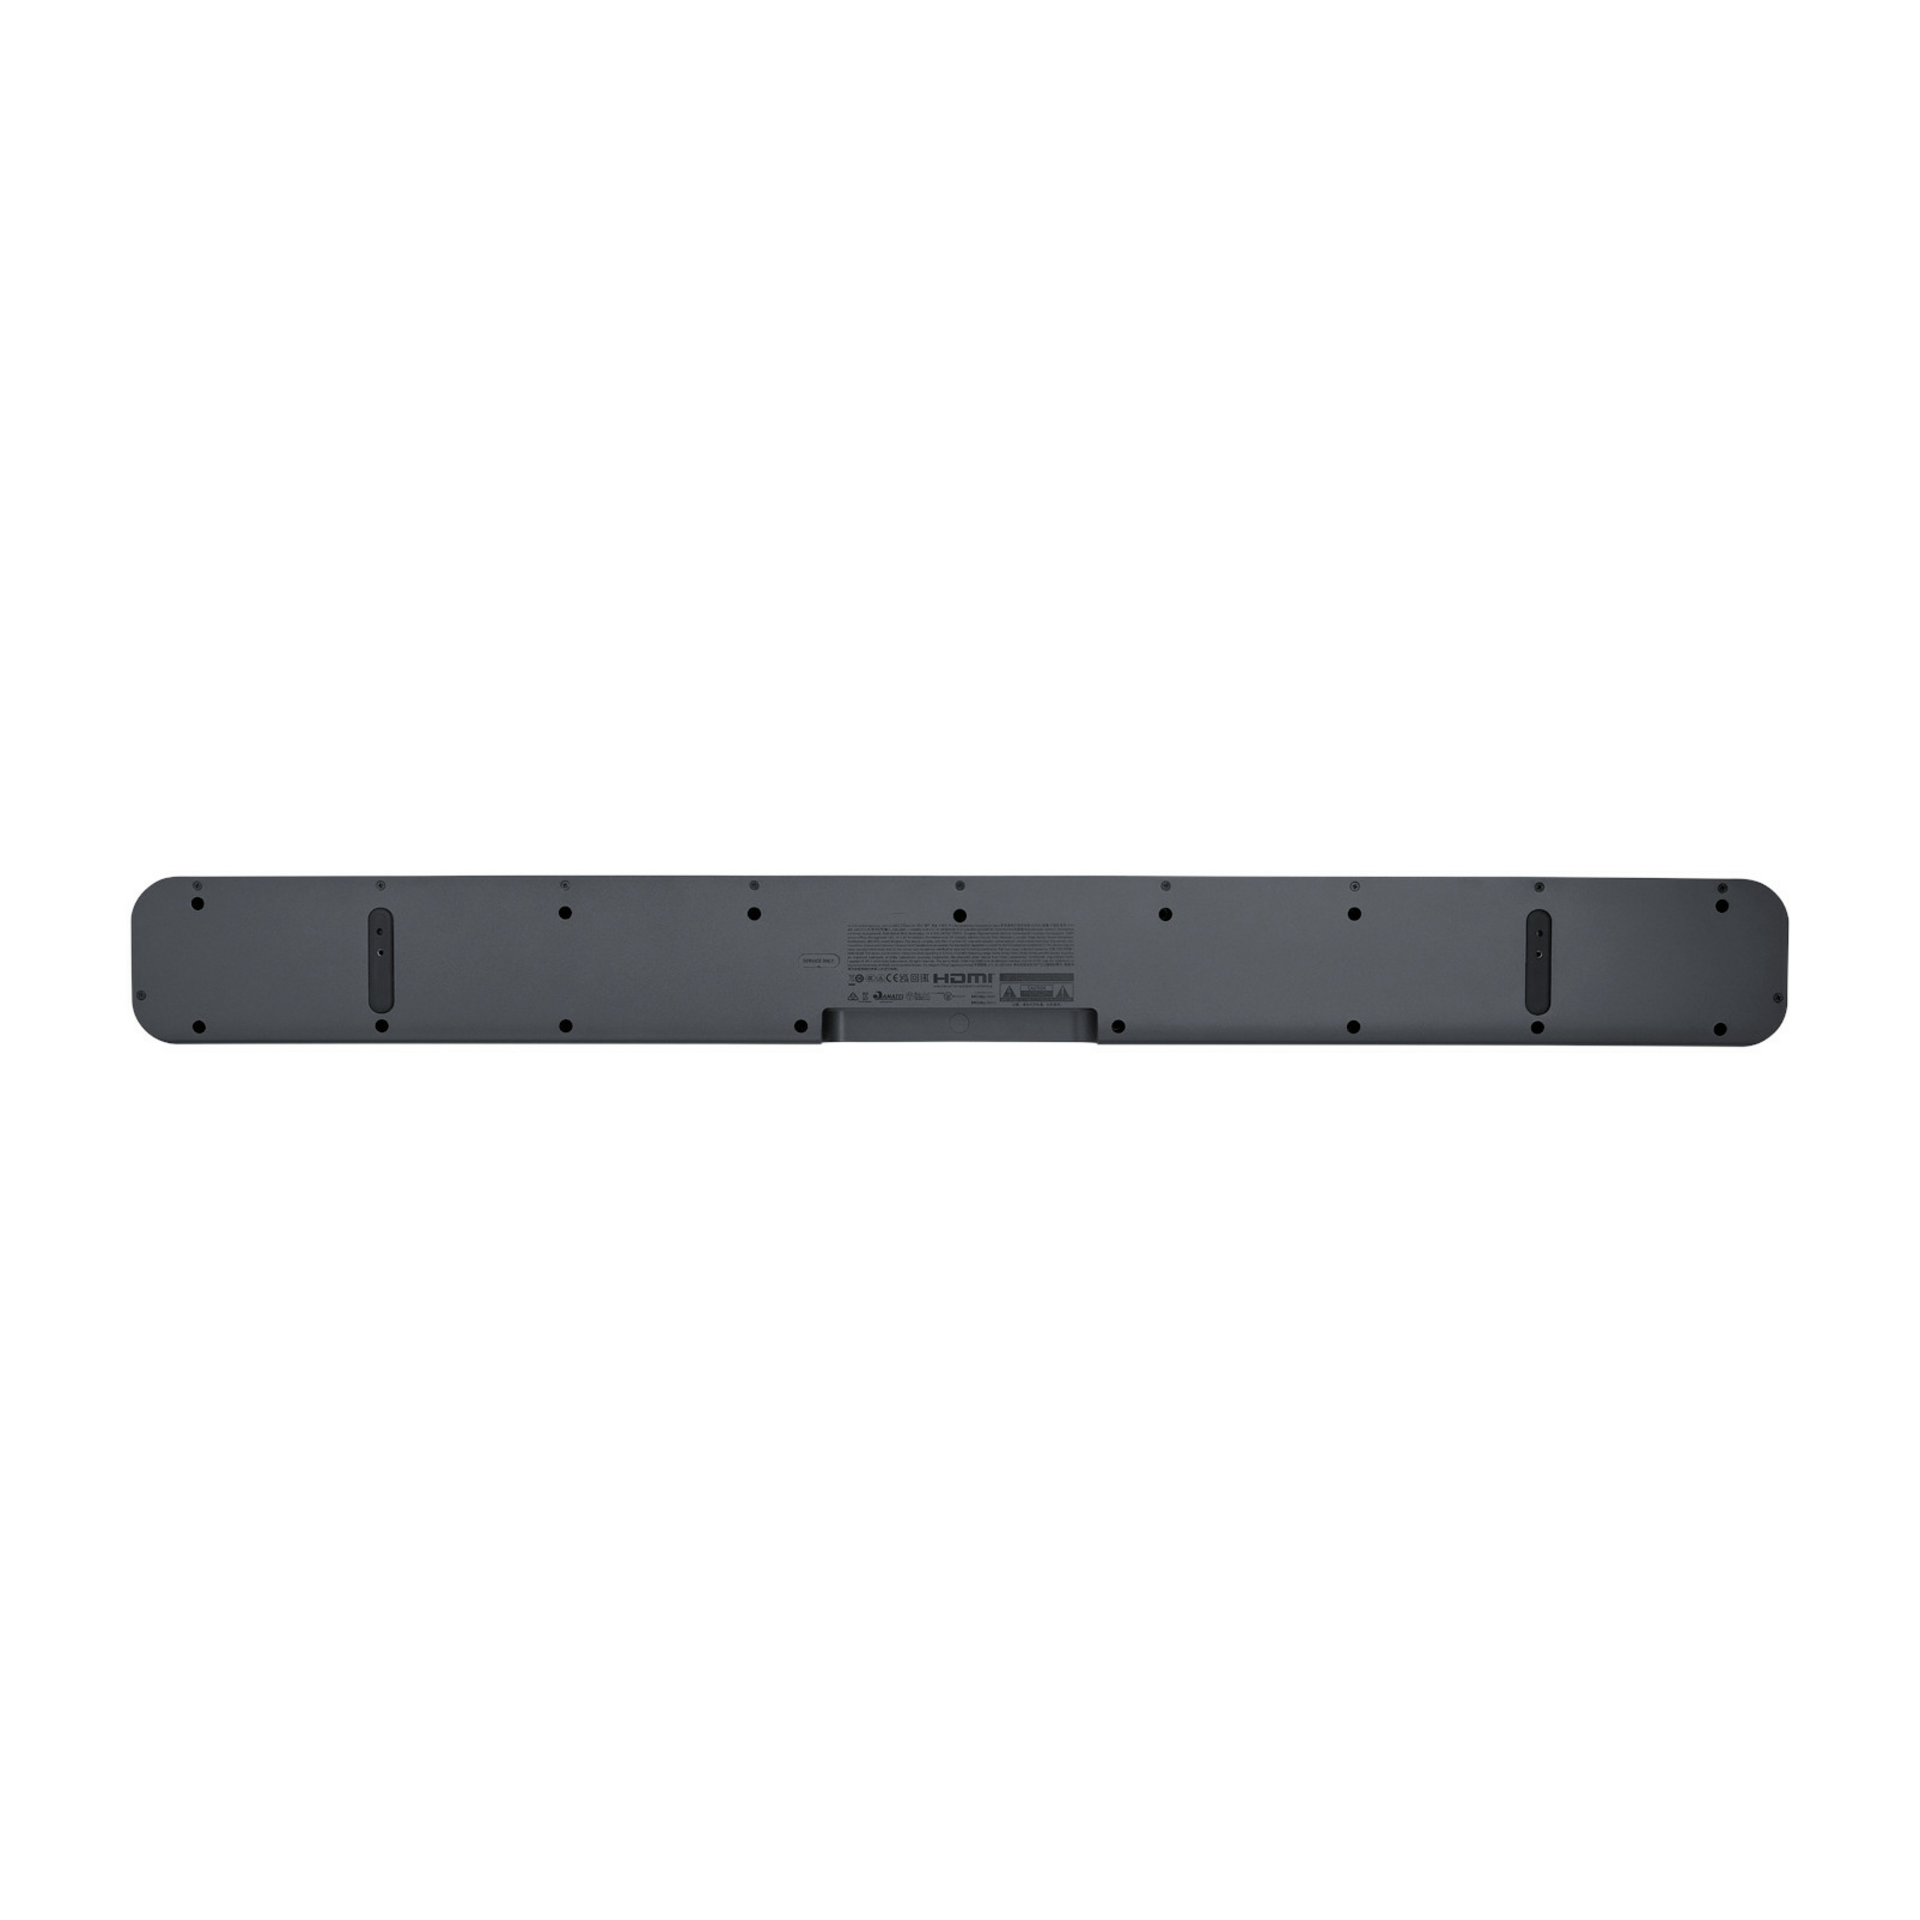 Jbl Bar 500 5.1 Channel Soundbar And 10 Wireless Subwoofer With Multibeam  Technology : Target